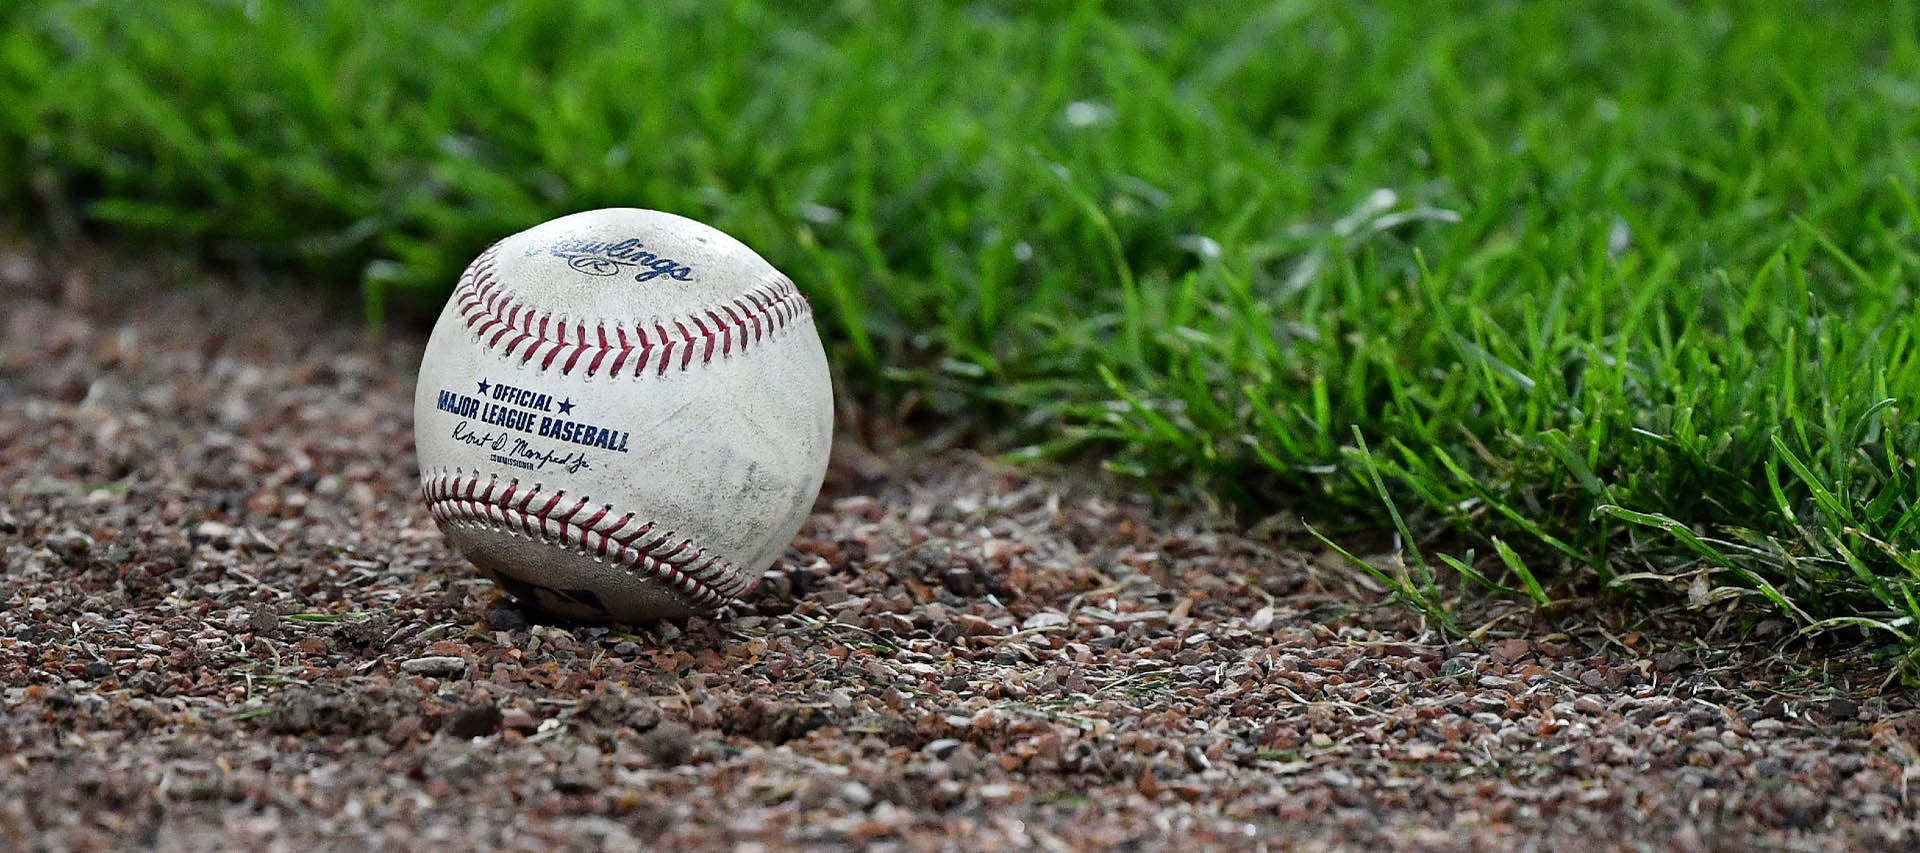 2022 MLB Straight-Up Week 16 Betting Picks for the Top Games On the Weekend